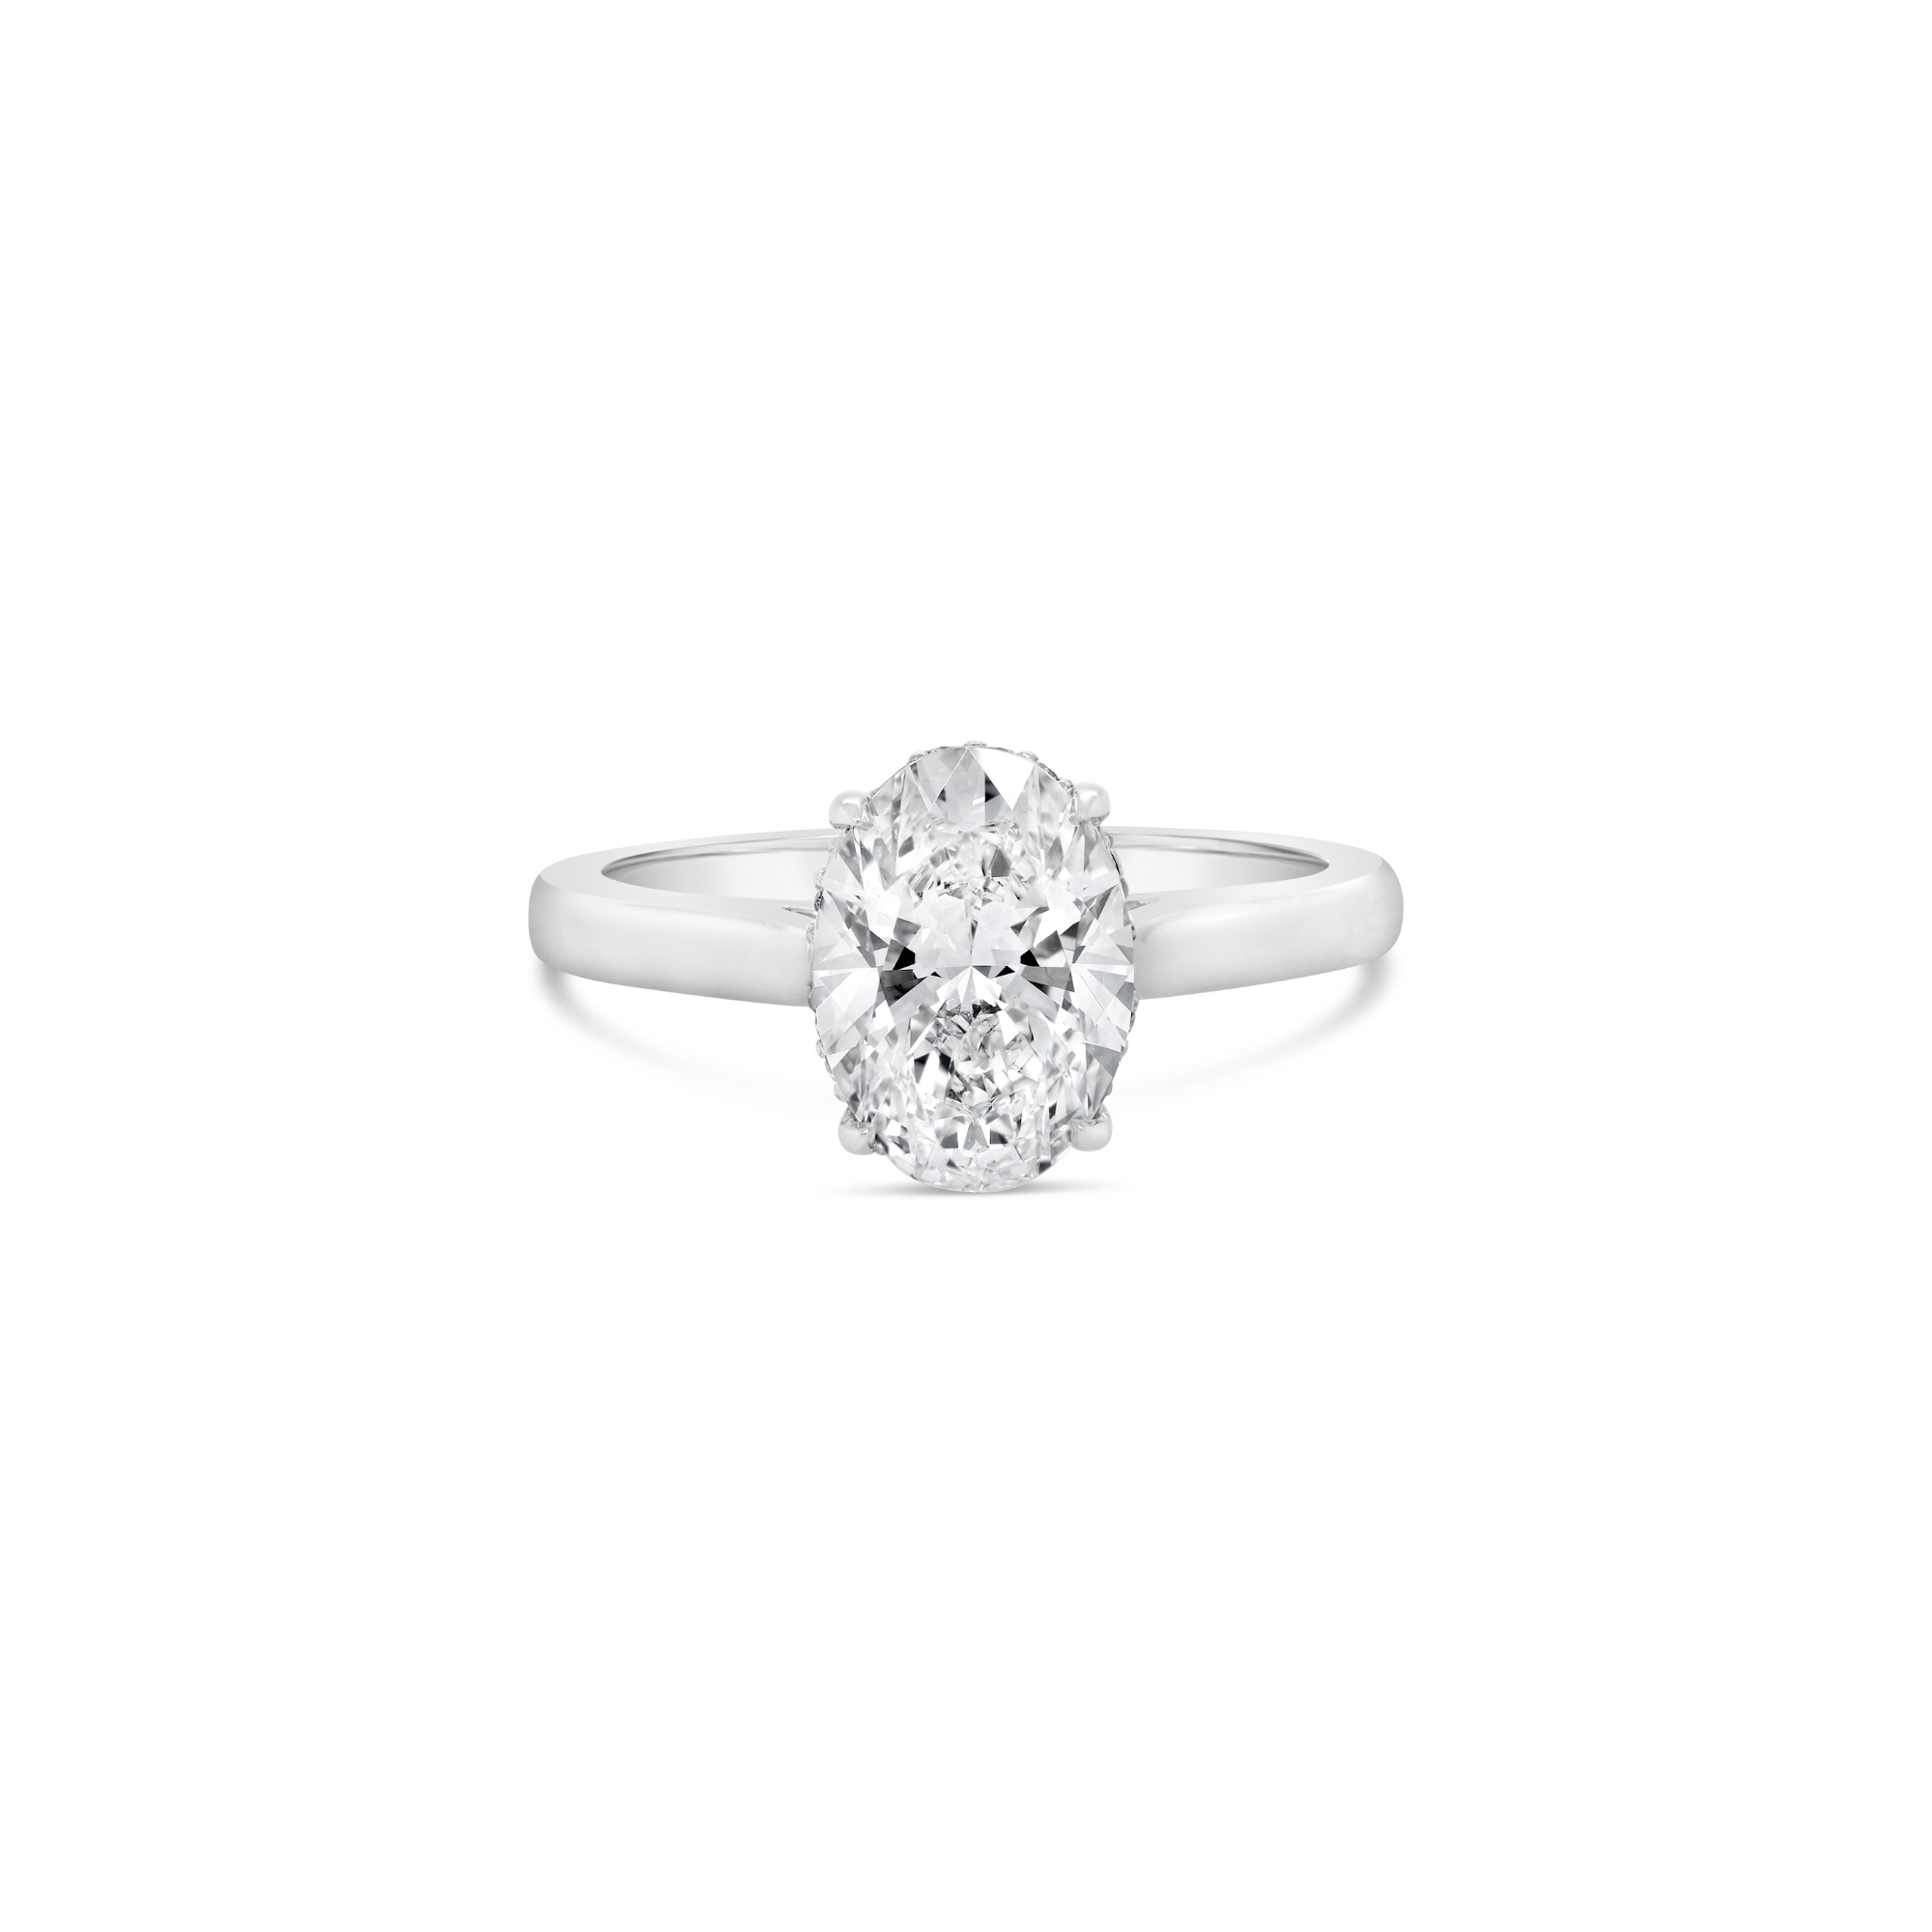 2ct oval cut lab grown diamond engagement ring white gold